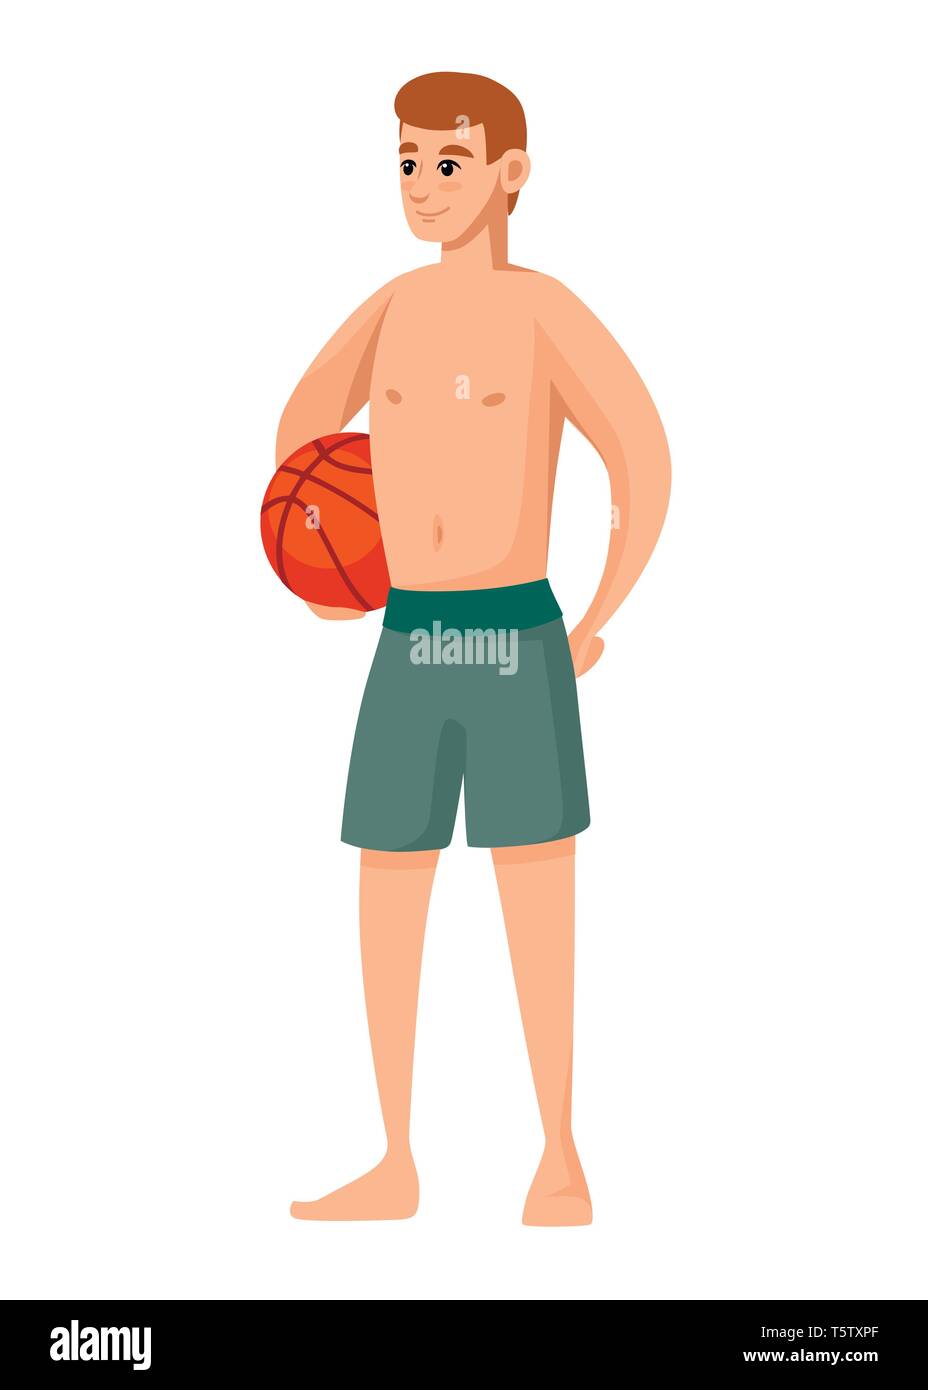 Men wear green swimsuit and hold basketball ball. Beach shorts. Cartoon character design. Flat vector illustration isolated on white background. Stock Vector